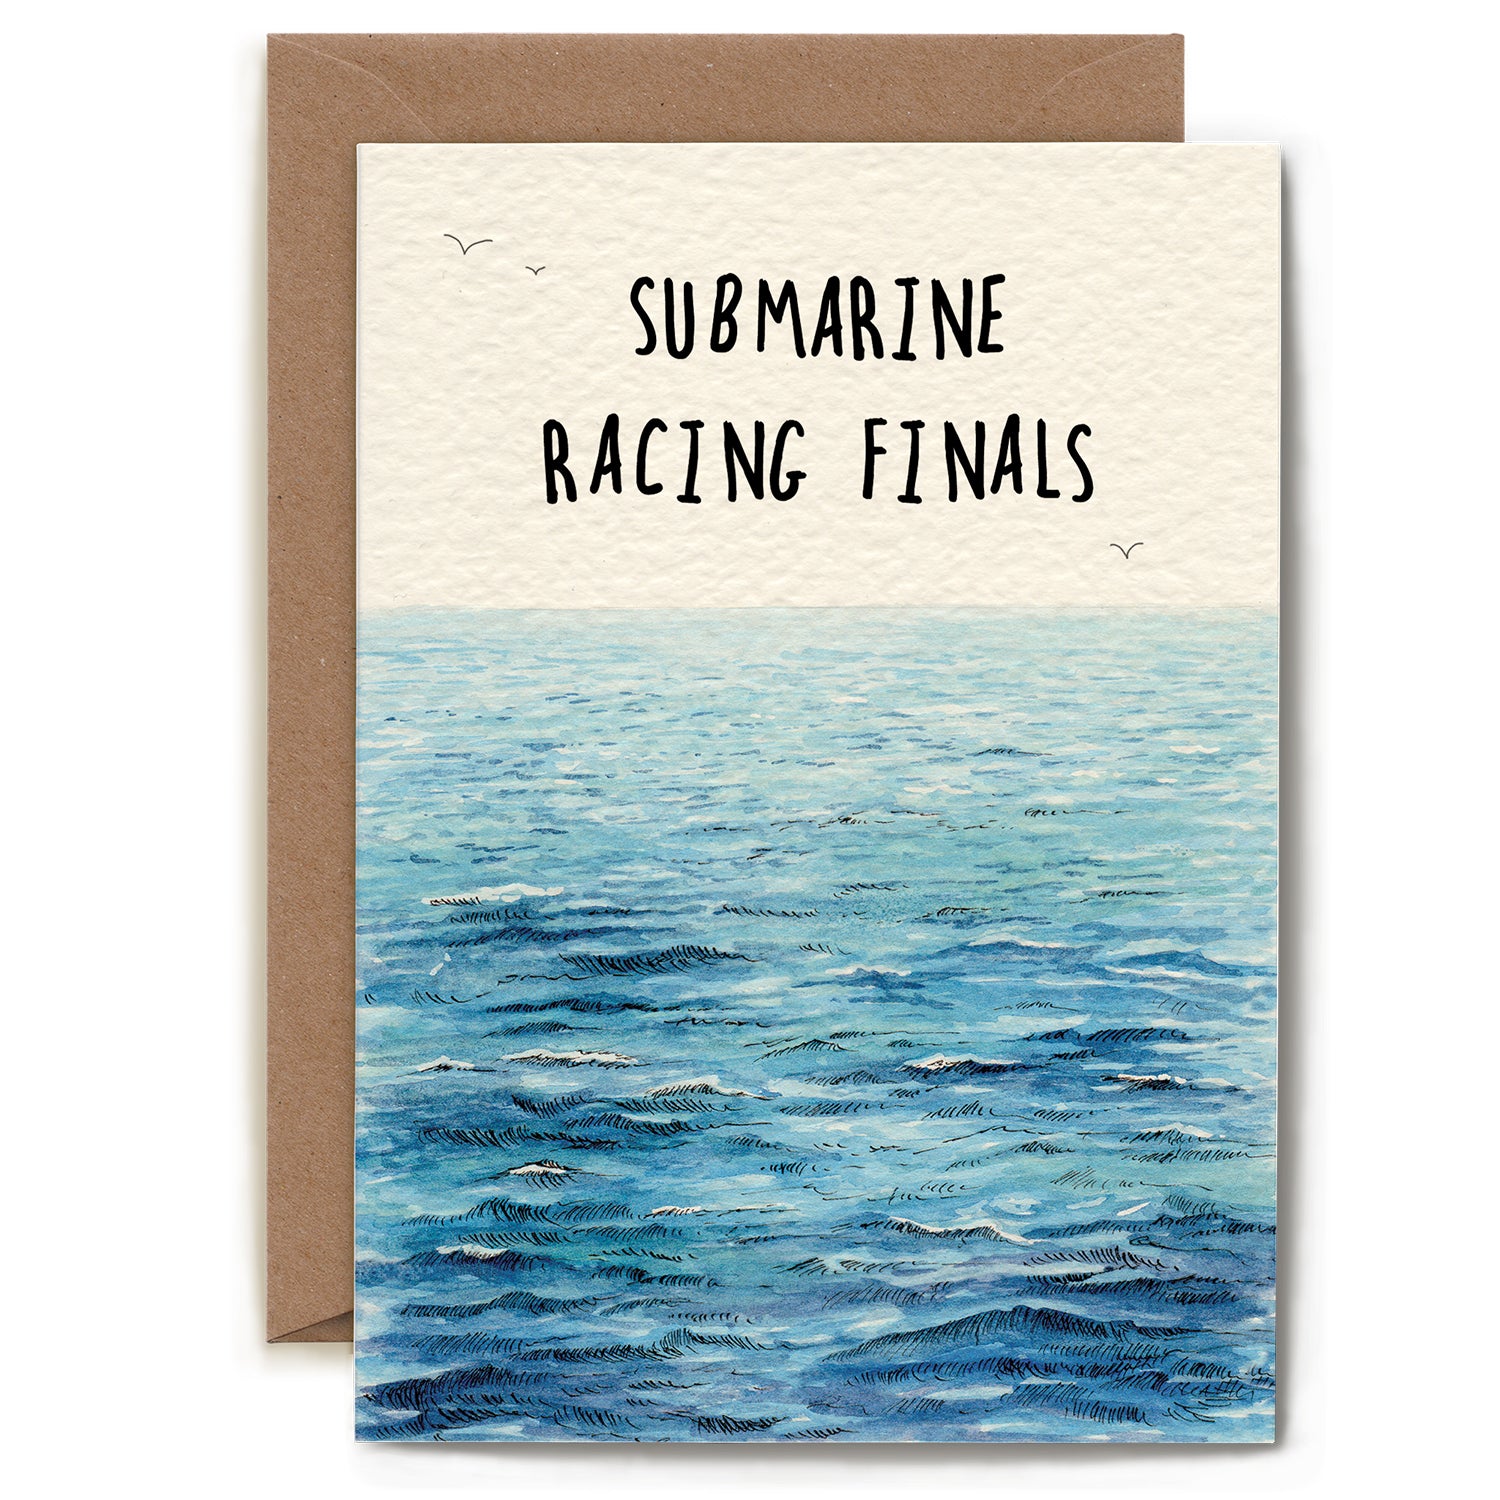 Cheeky and witty animal illustrations adorn the Hester &amp; Cook Bewilderbeest Submarine Racing Card for the thrilling submarine racing finals.